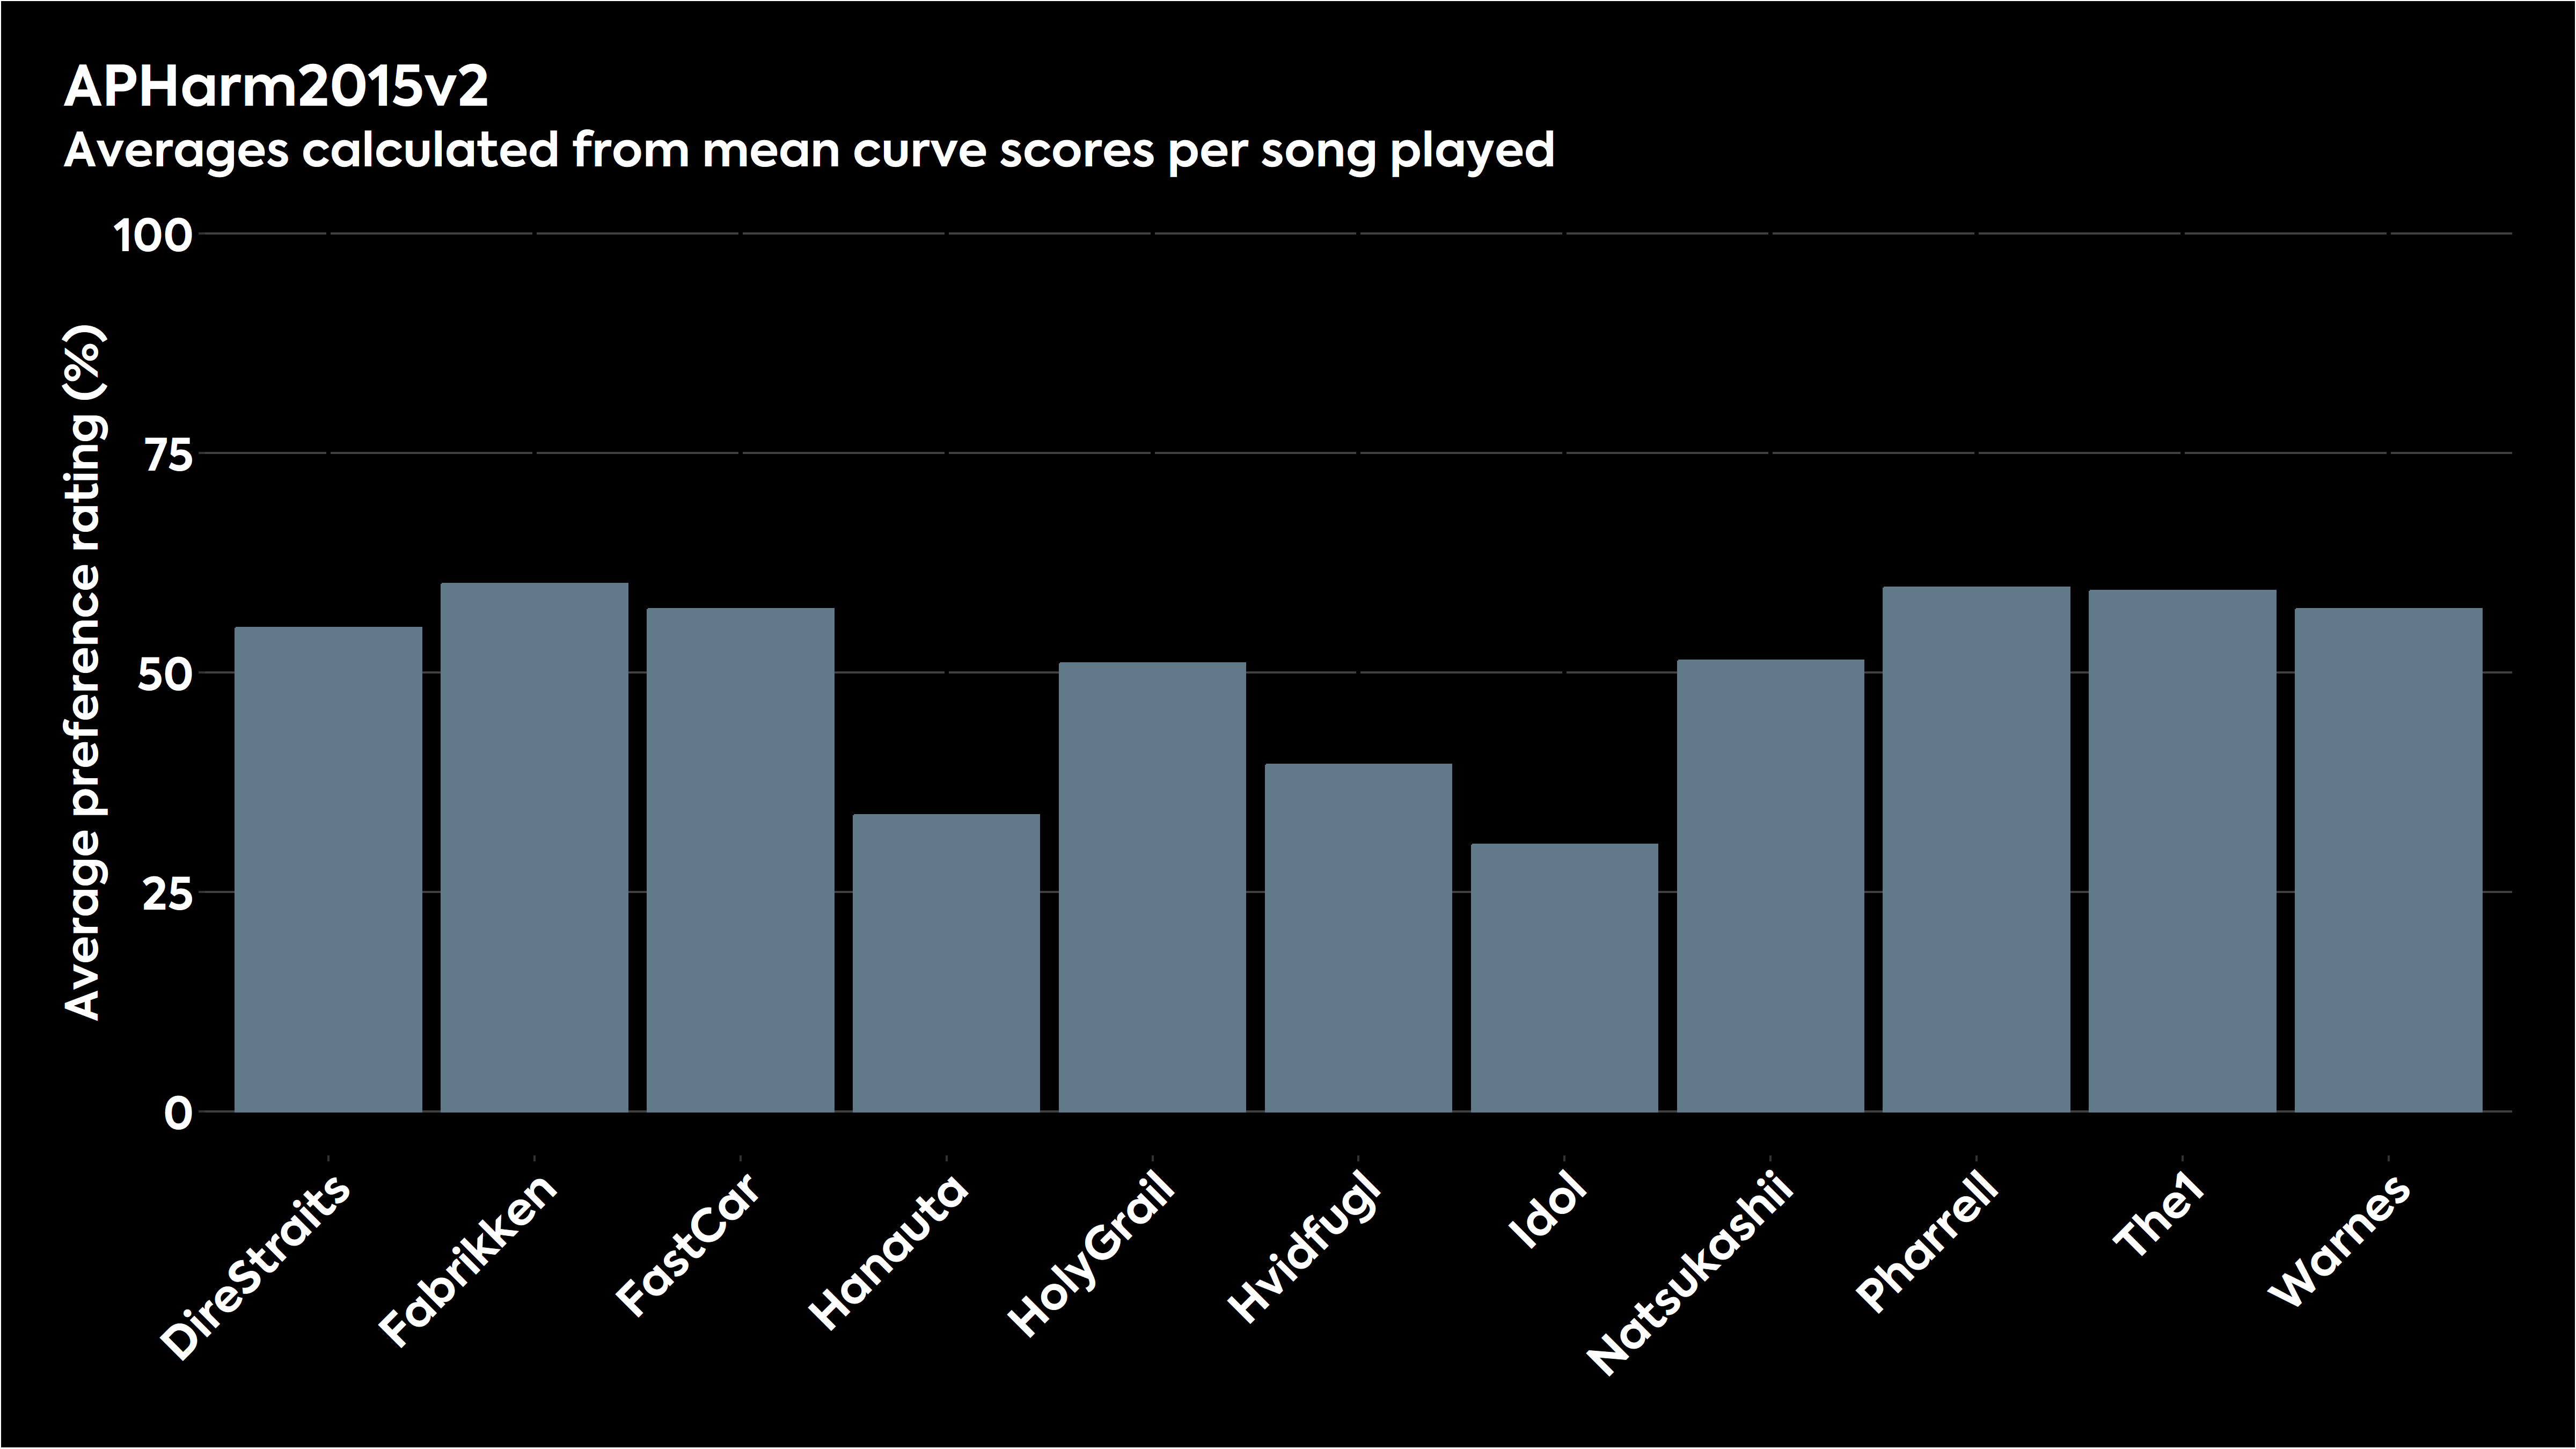 Bar chart showing how the various stimuli were judged for modified Harman 2015 in listening tests.